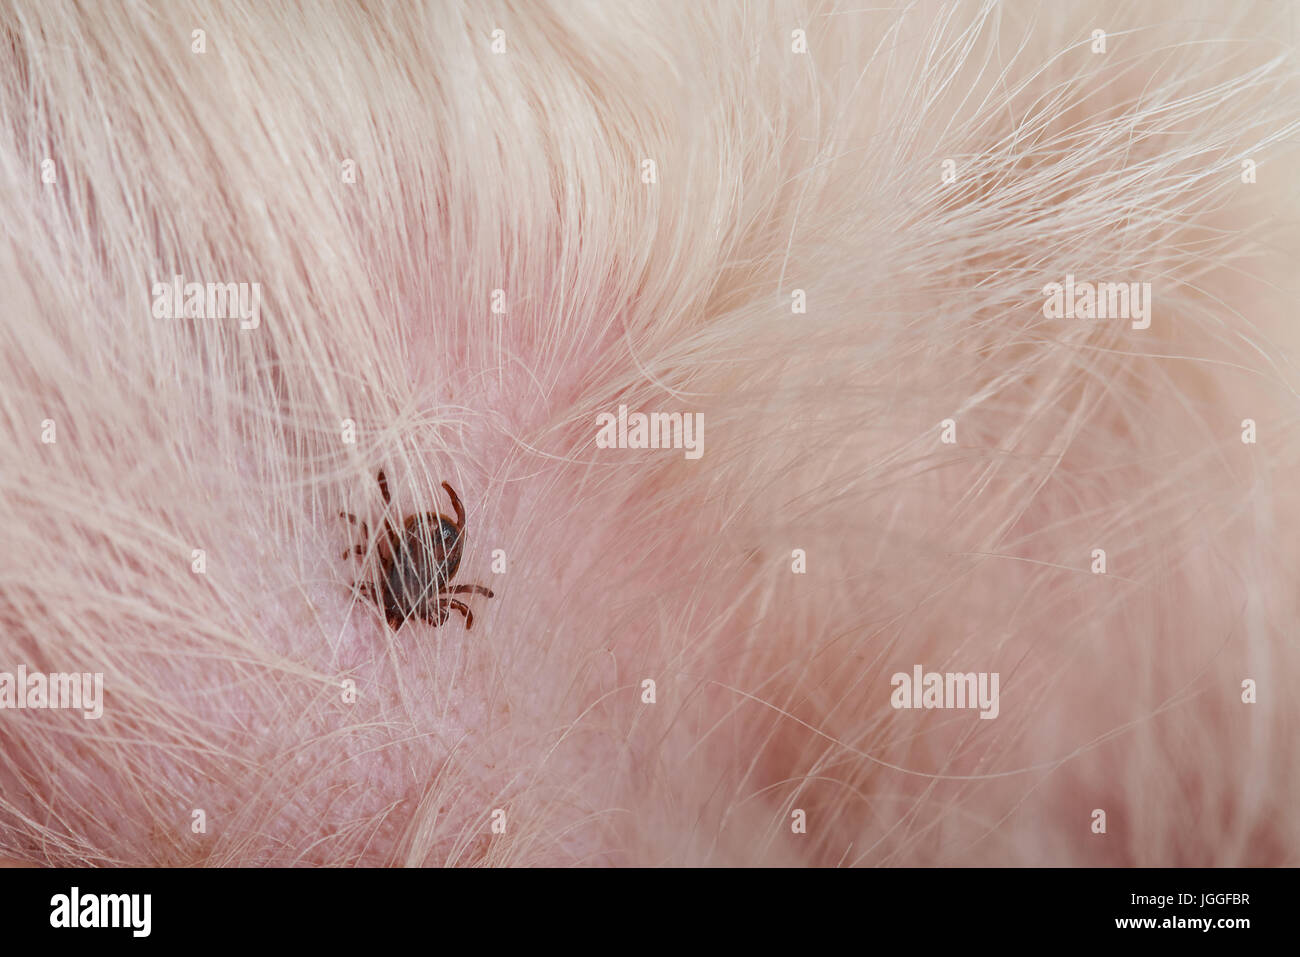 Dog tick insect close-up sitting on skin under fur Stock Photo